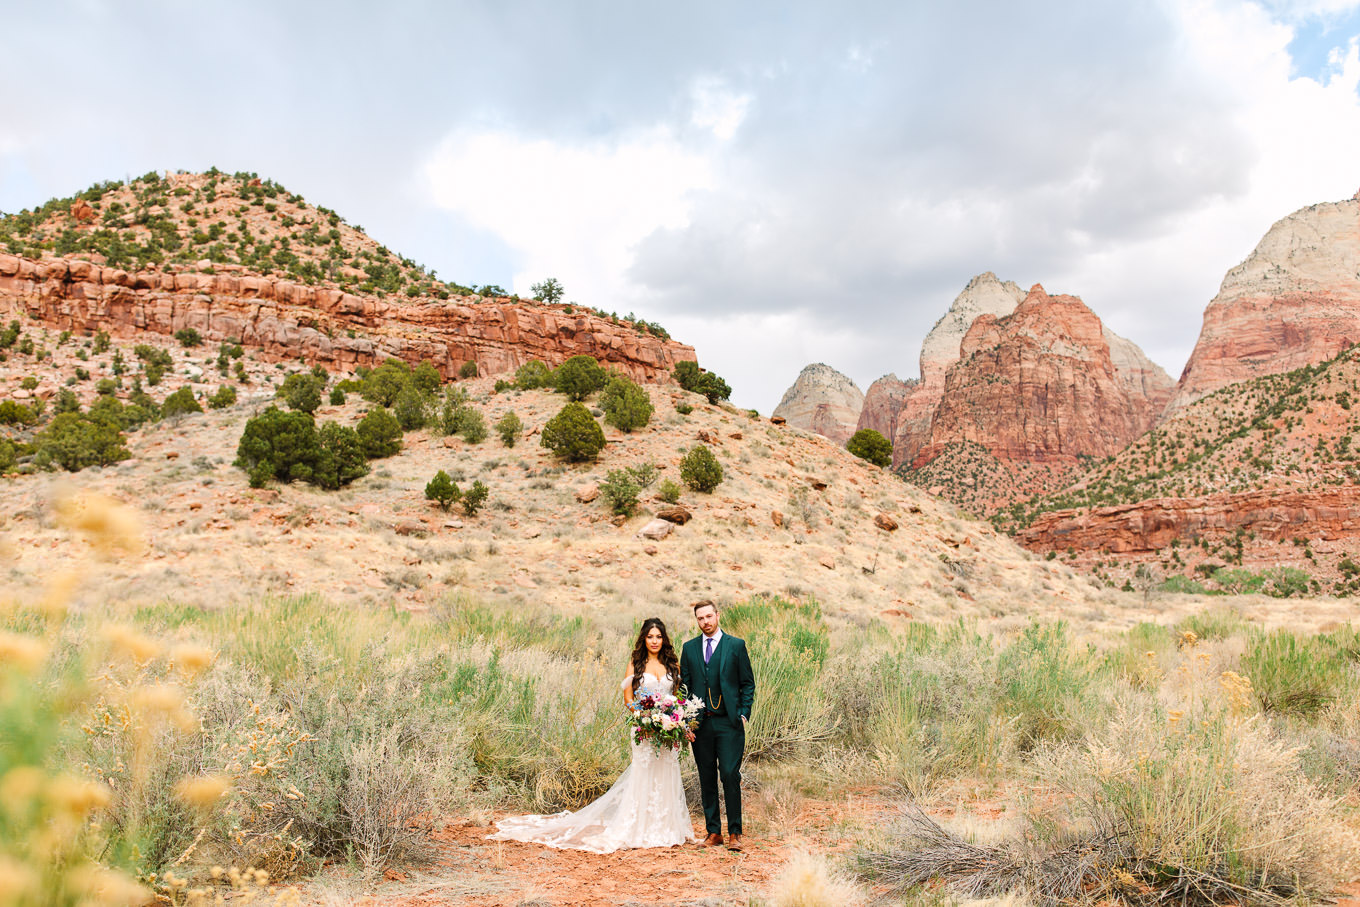 Groom in green suit with bride in Zion National Park | Zion National Park elopement | Colorful adventure elopement photography | #utahelopement #zionelopement #zionwedding #undercanvaszion   Source: Mary Costa Photography | Los Angeles